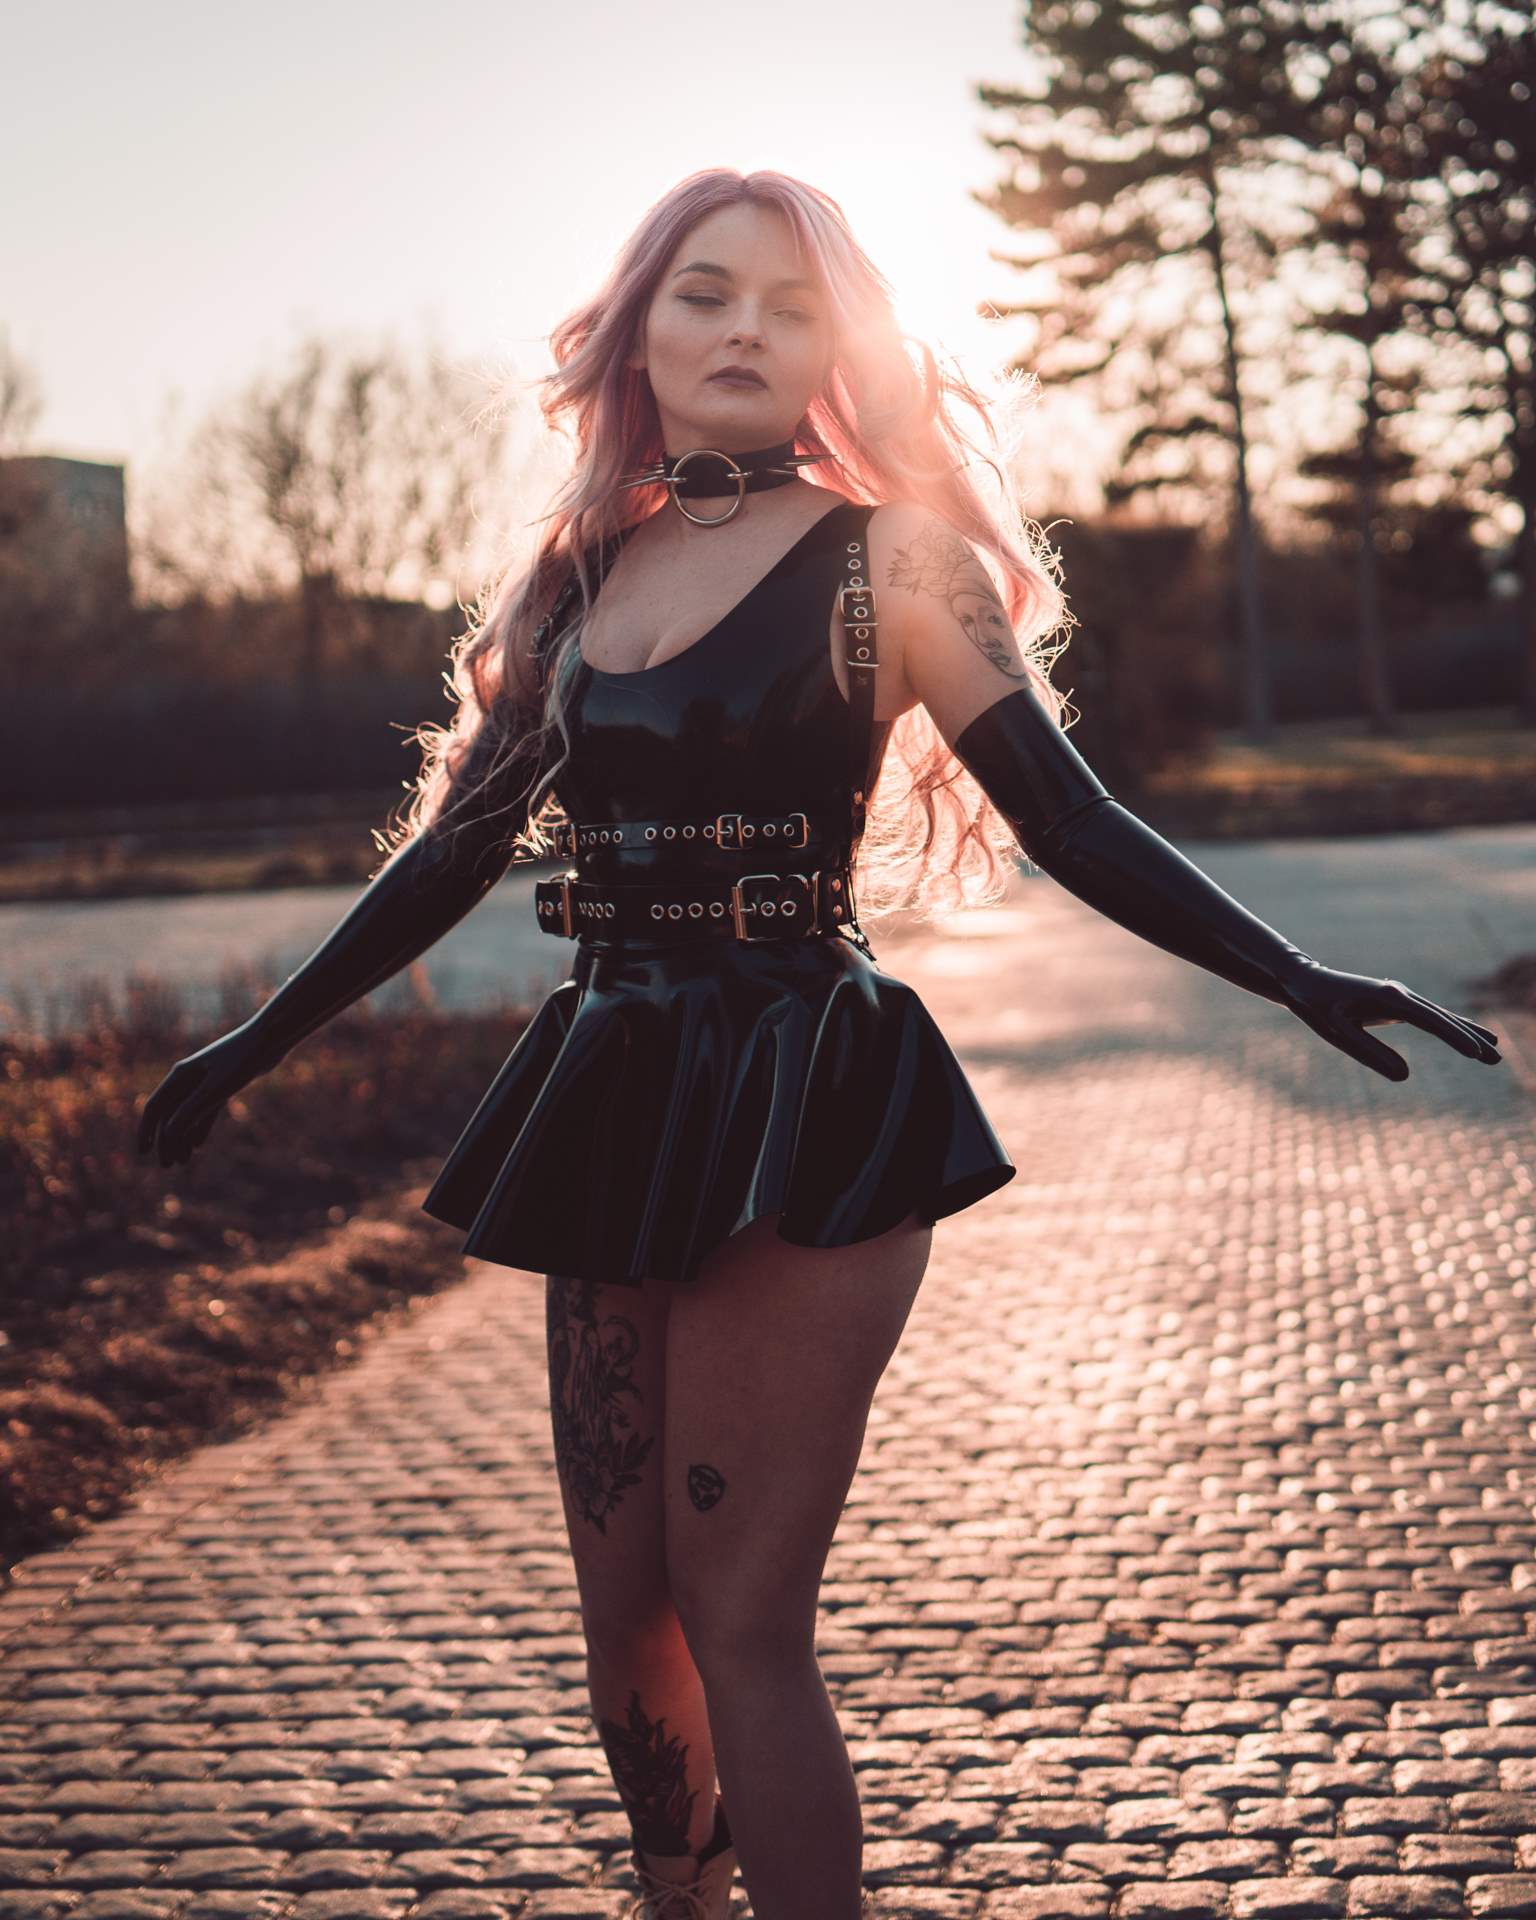 Latex dress accessorized with a striking harness and black choker